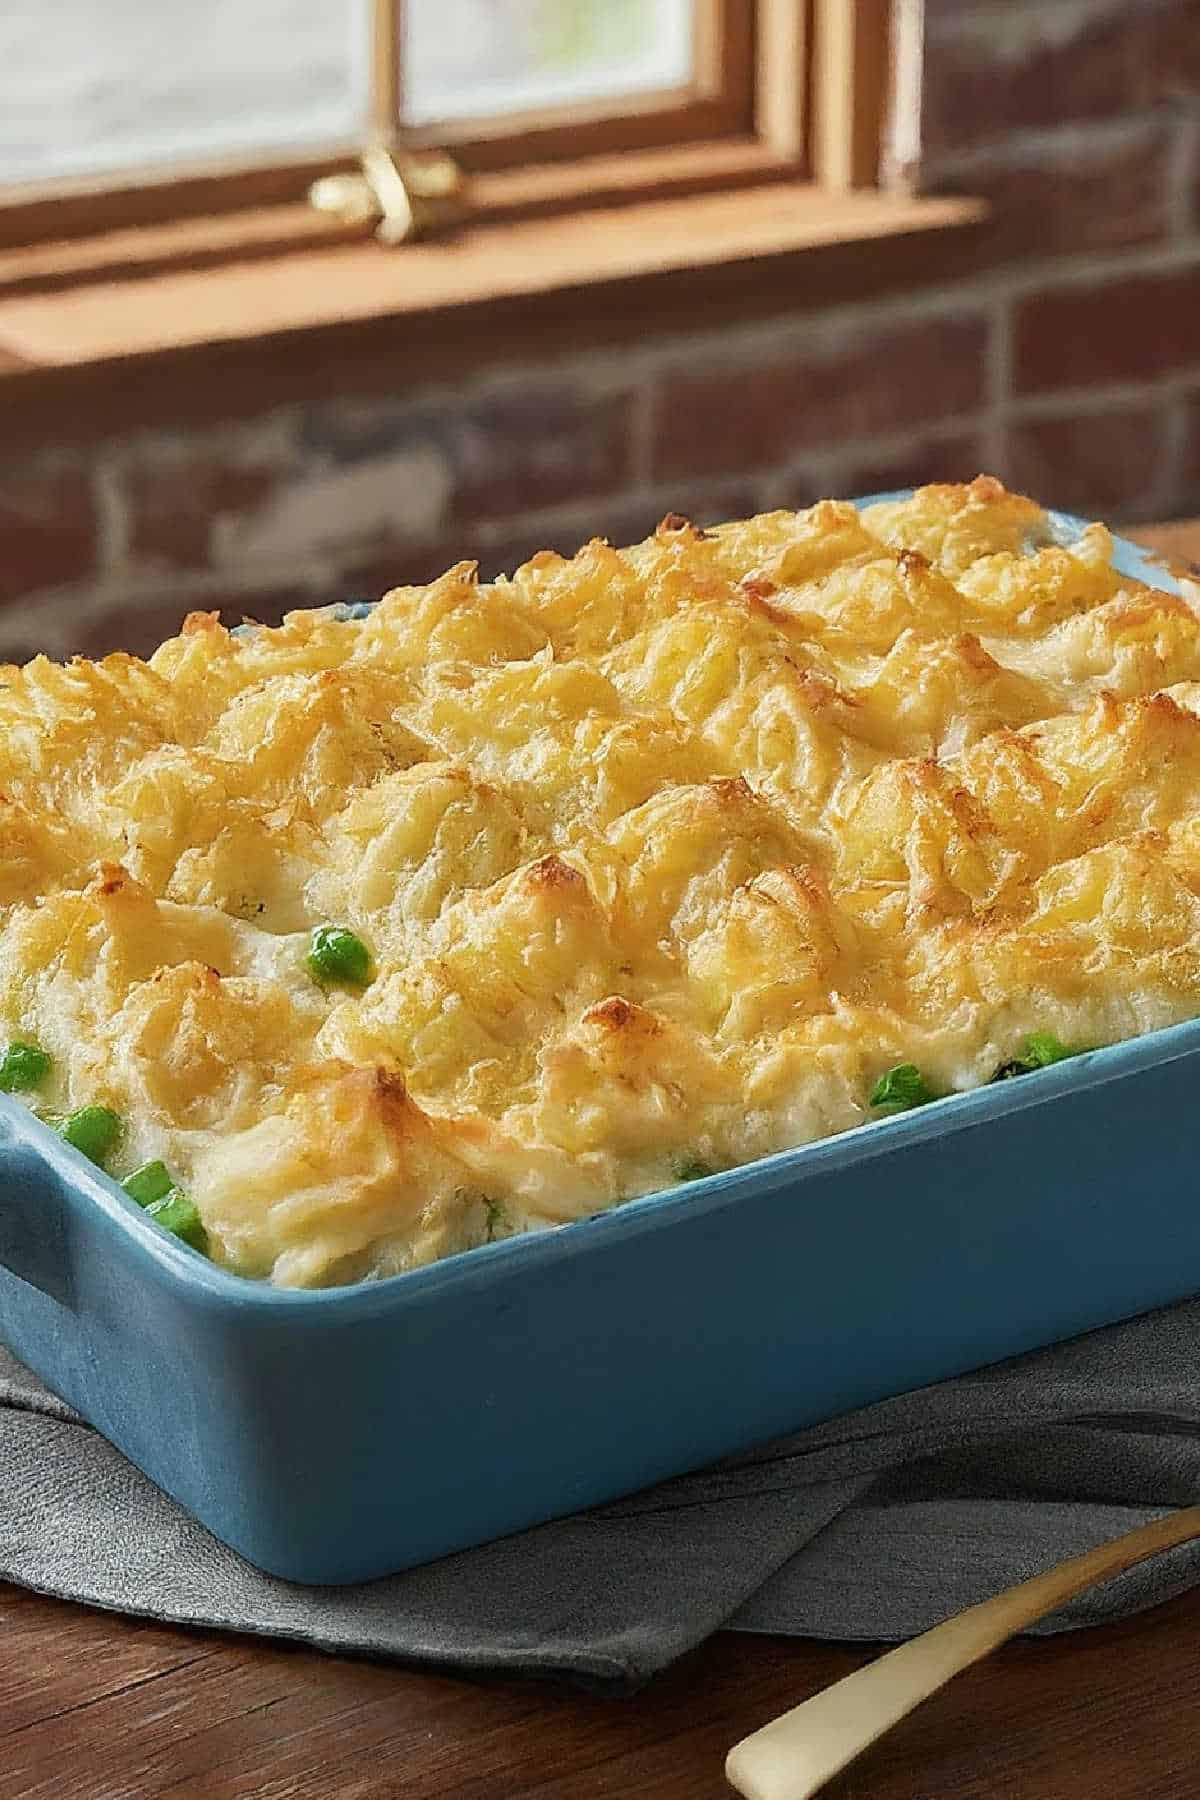 A casserole dish filled with fishermans pie, with piped mashed potatoes on top.